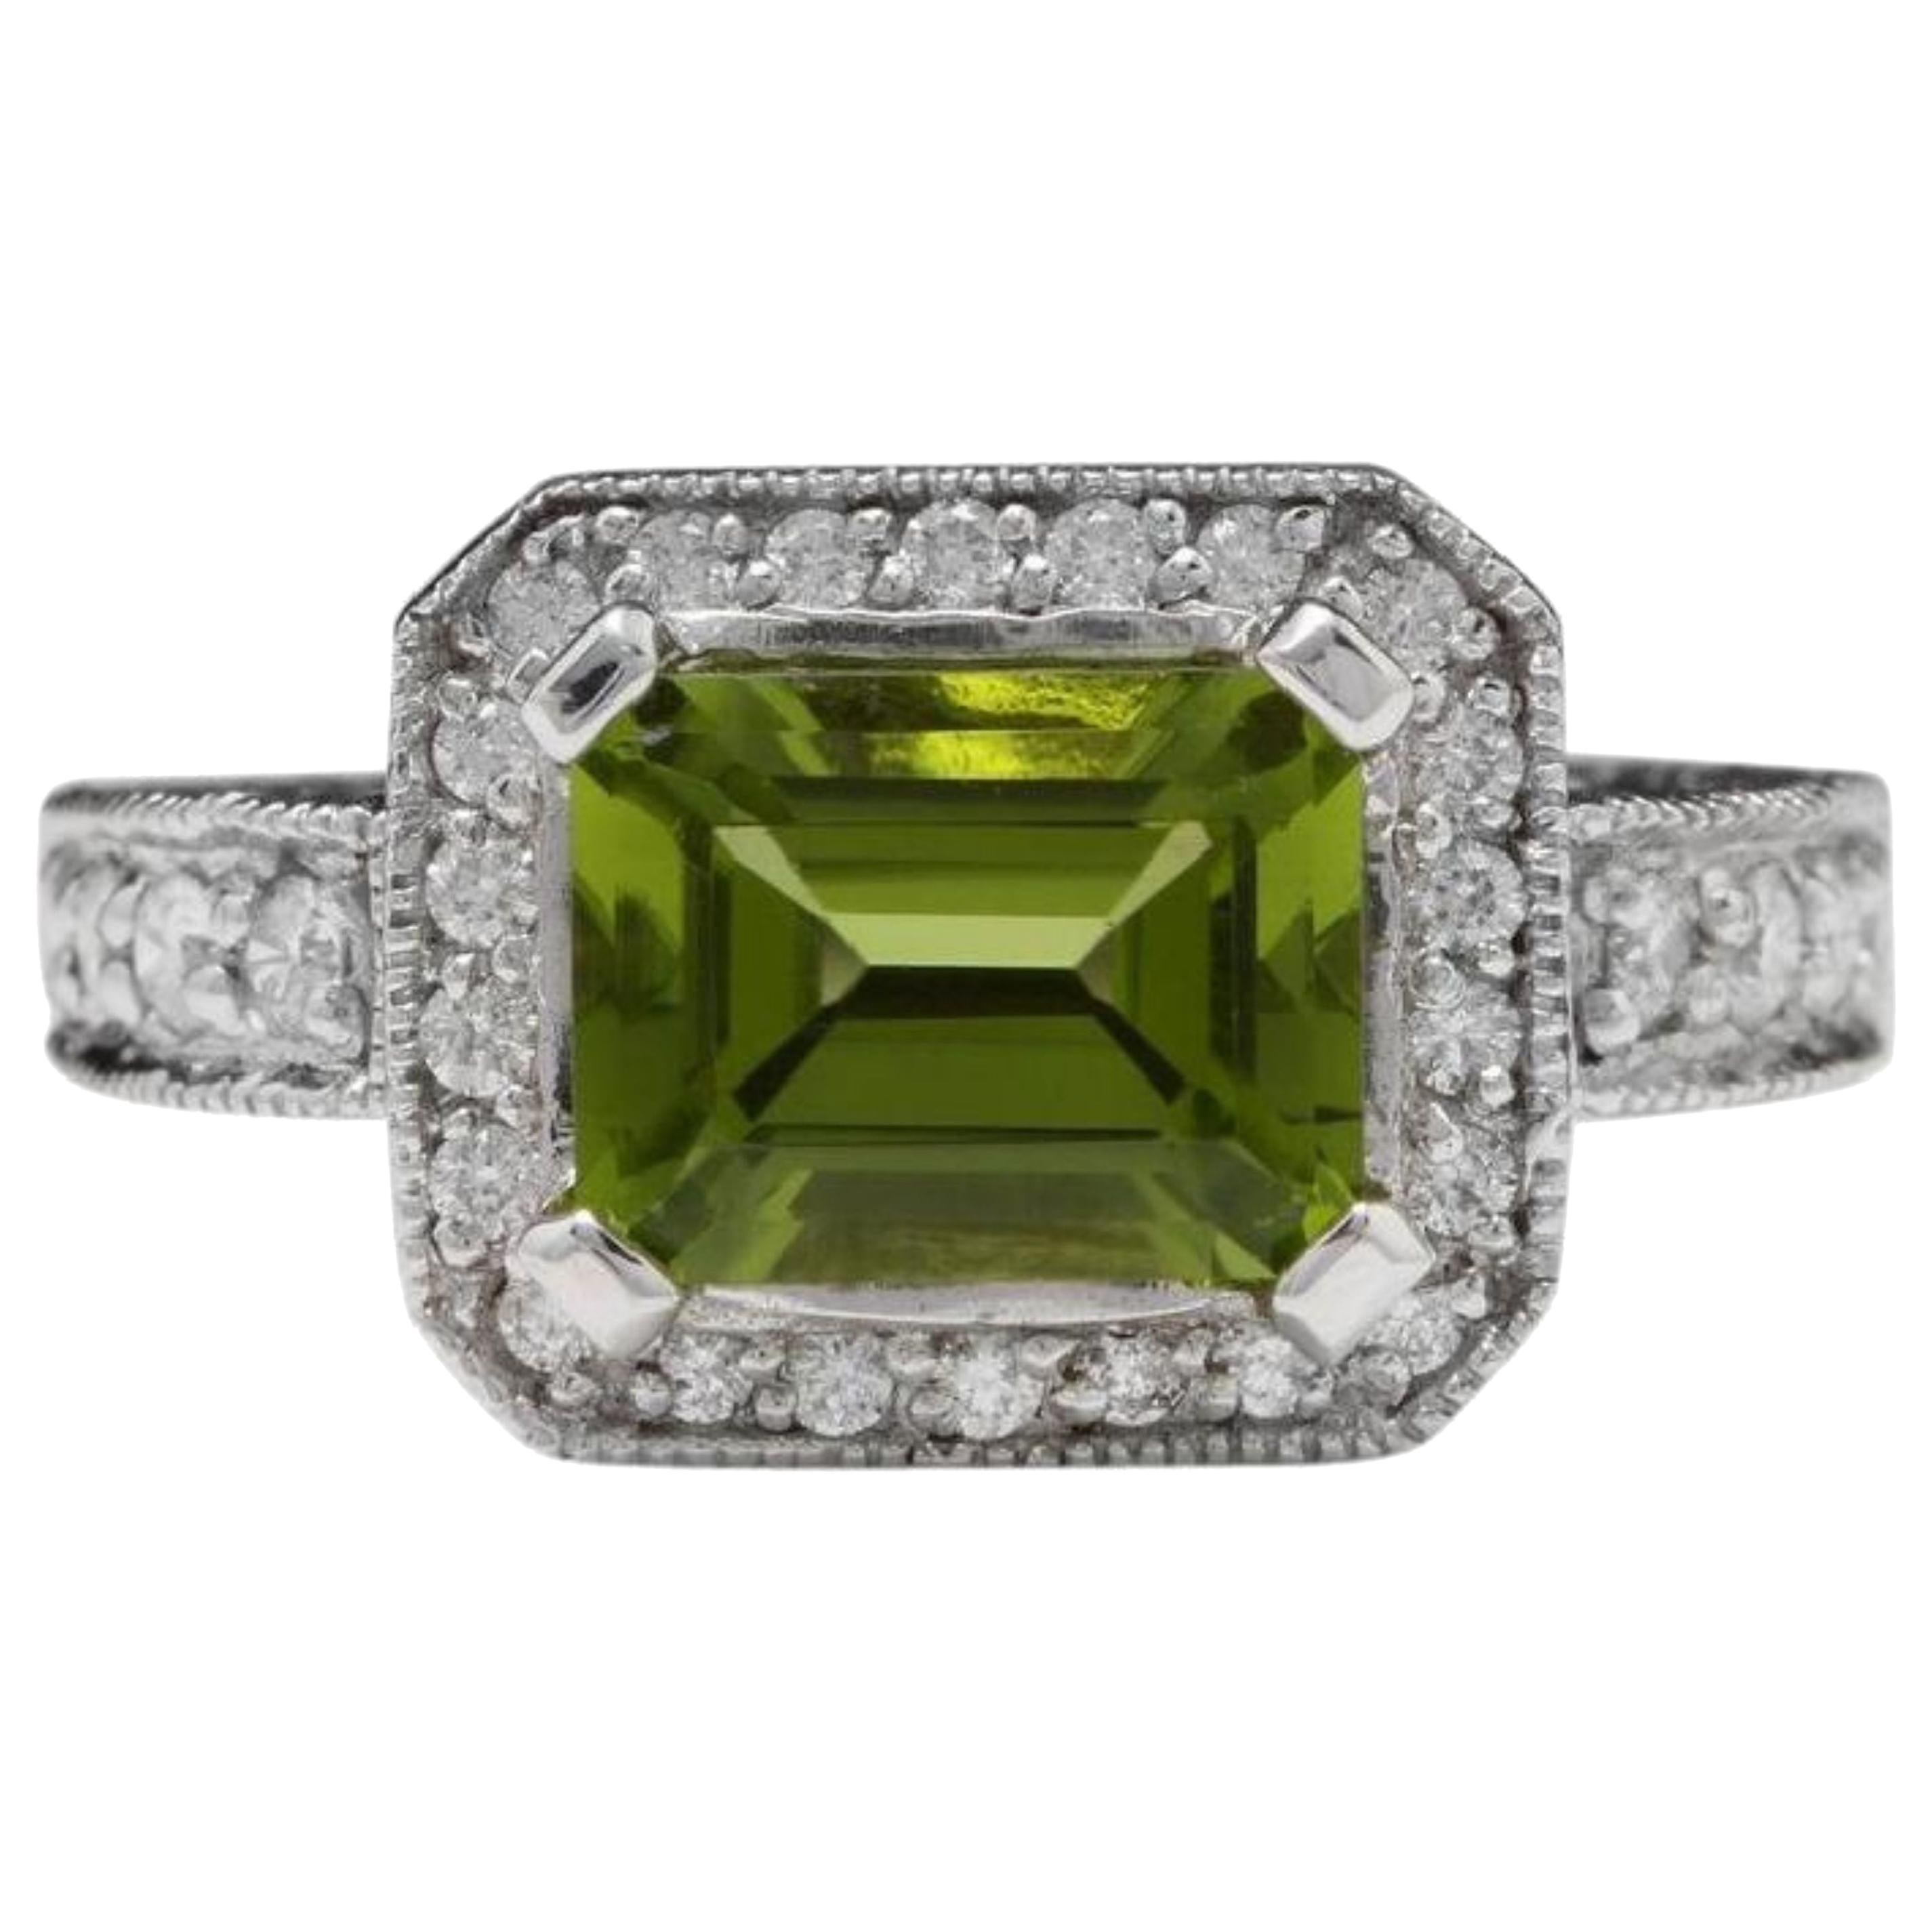 3.75 Ct Natural Very Nice Looking Peridot and Diamond 14K Solid White Gold Ring